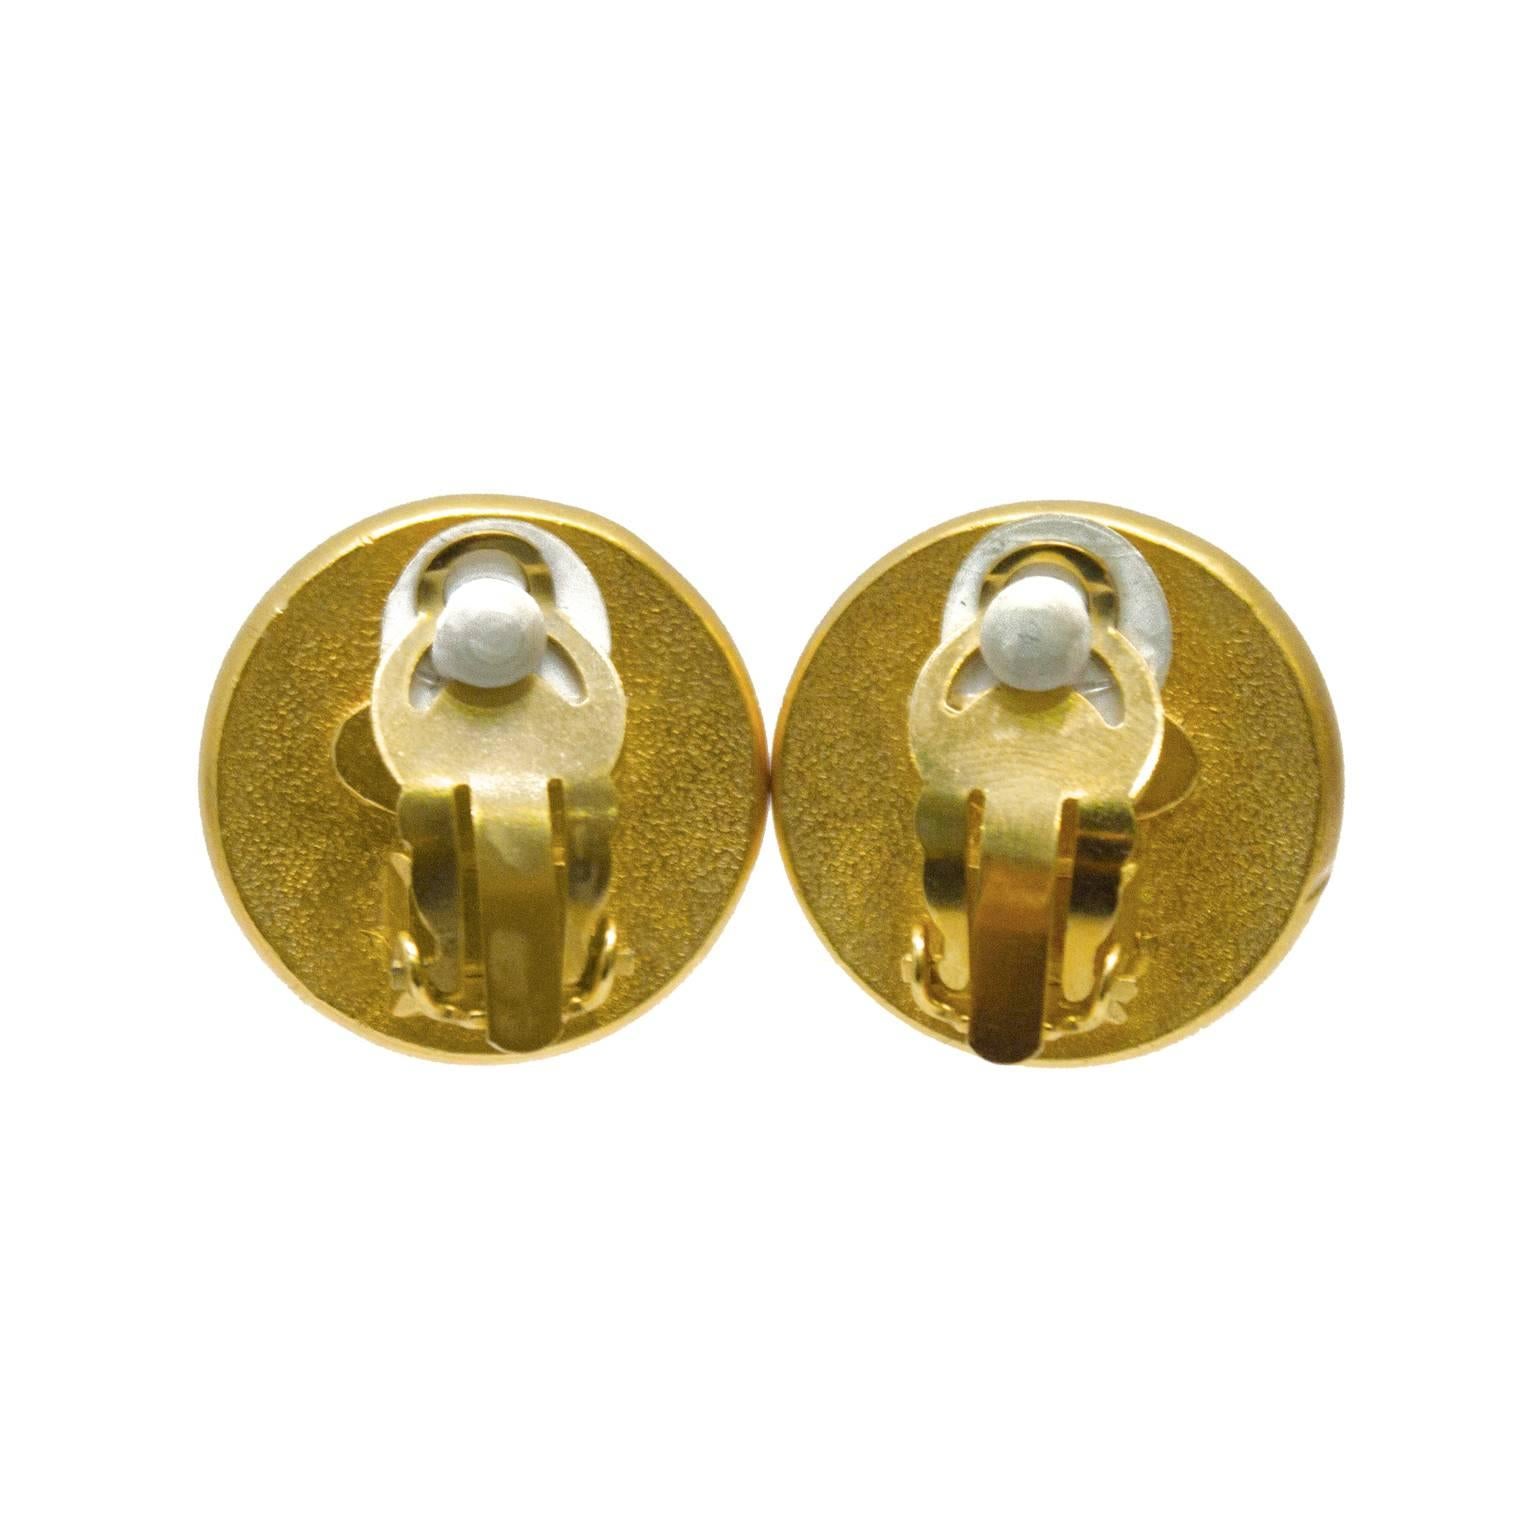 Chanel pearl clip on style earrings from the 1993 Fall collection. The earrings feature a faux pearl center surrounded by a smooth border stamped with CHANEL PARIS. In excellent condition. 